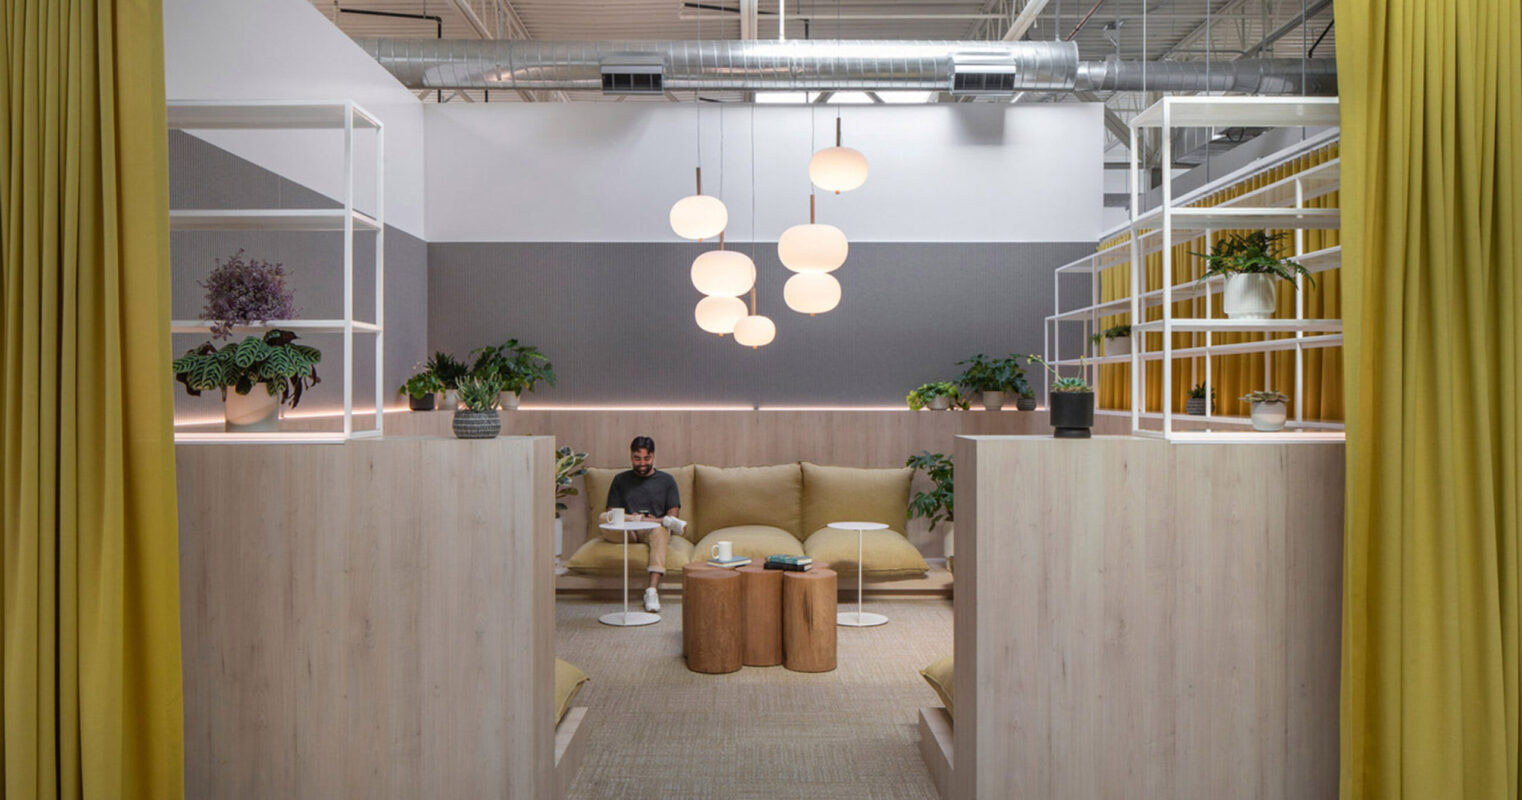 Open-plan office space featuring minimalist wooden partitions, vibrant yellow drapery for privacy, and a comfortable seating area with a tan sofa. Overhead, spherical pendant lights provide soft illumination, complementing indoor greenery and enhancing the modern, tranquil atmosphere.